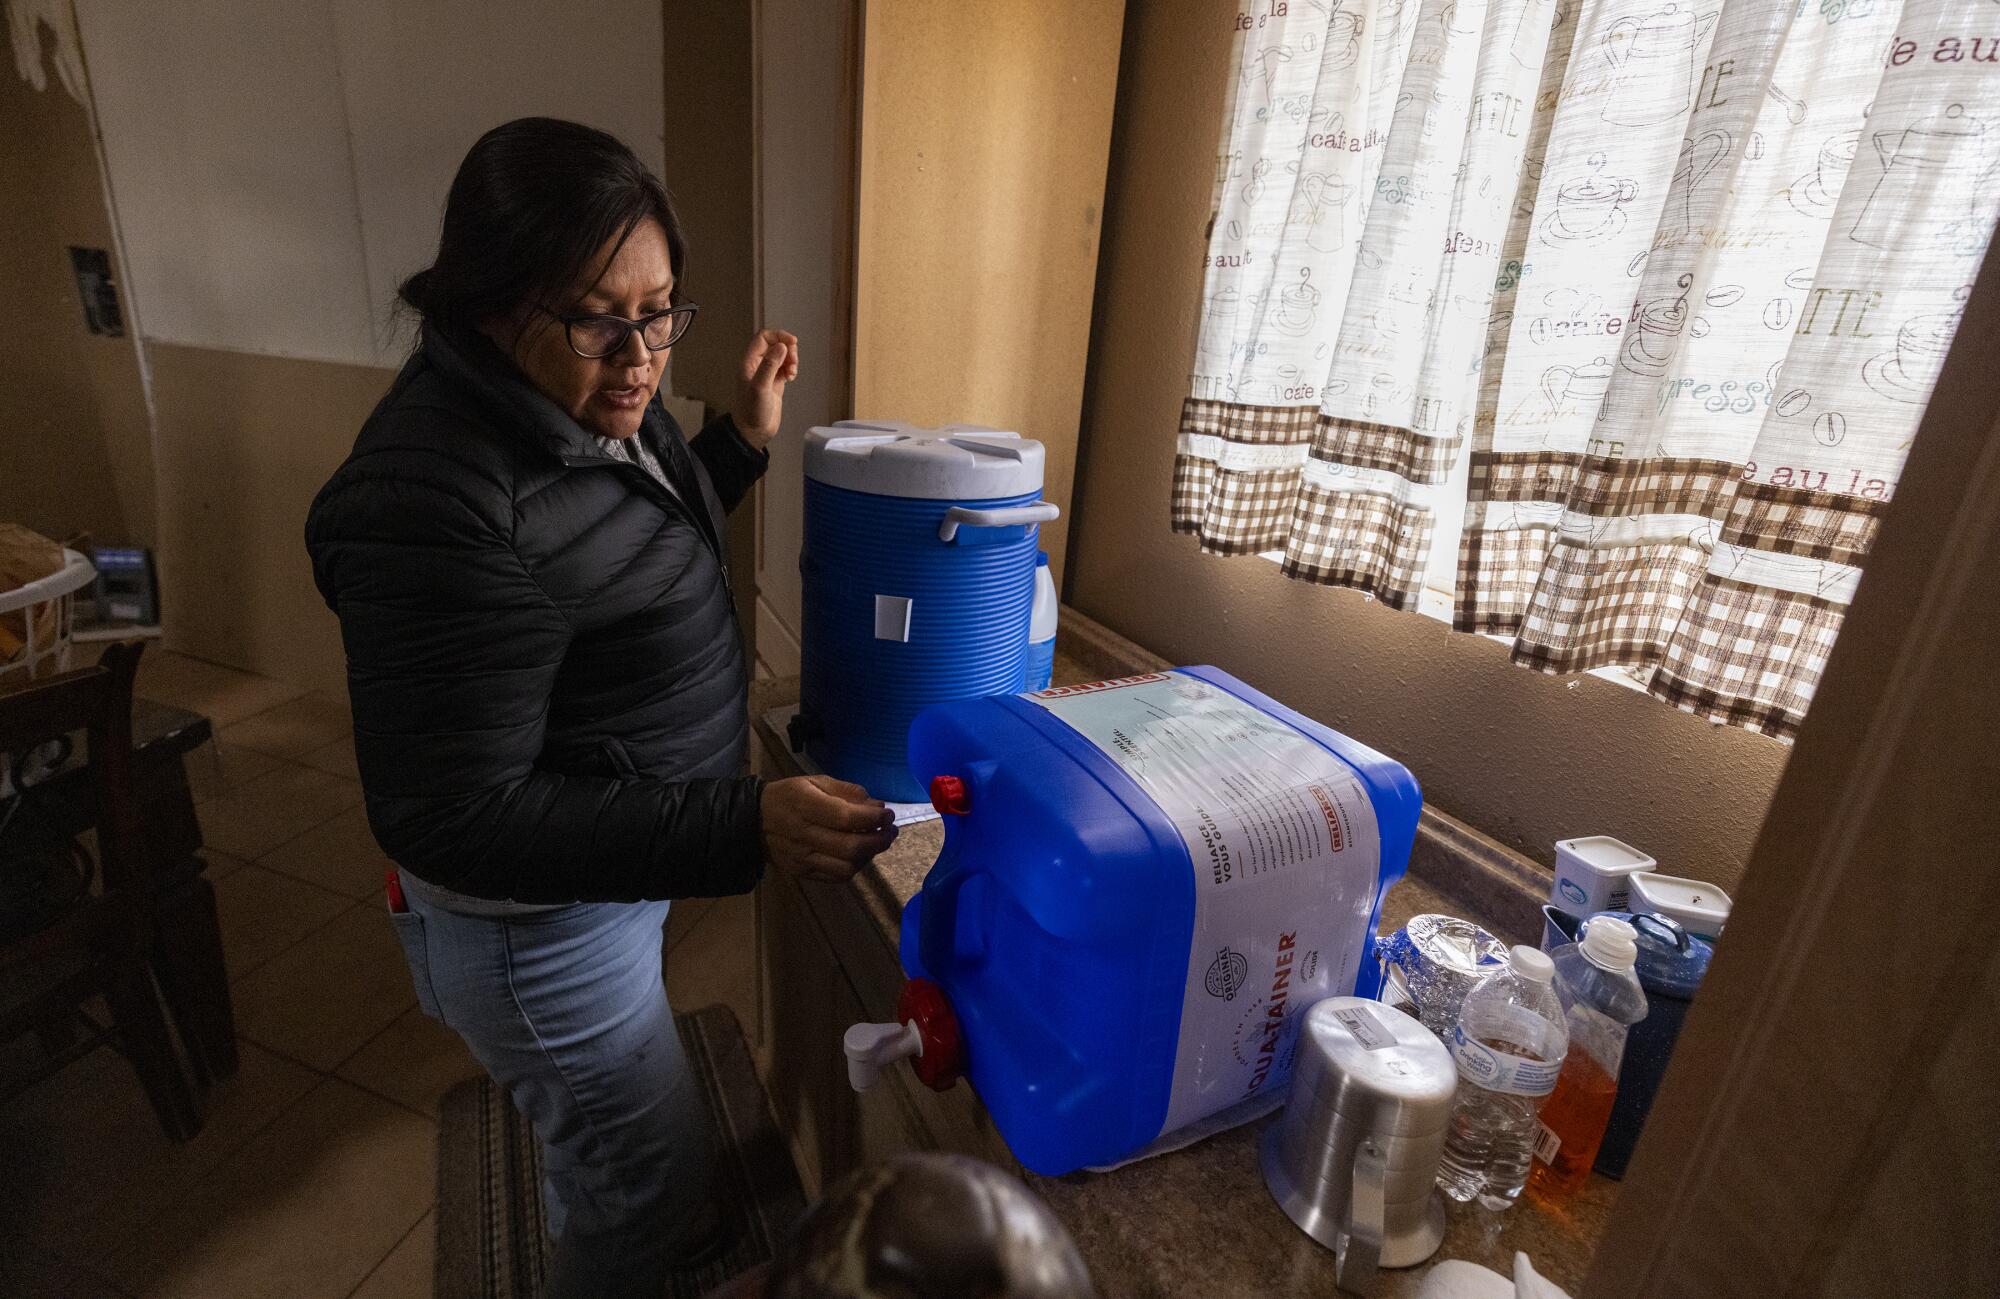 Shanna Yazzie looks over water jugs while completing a survey at the home rural of Alfreda Manheime